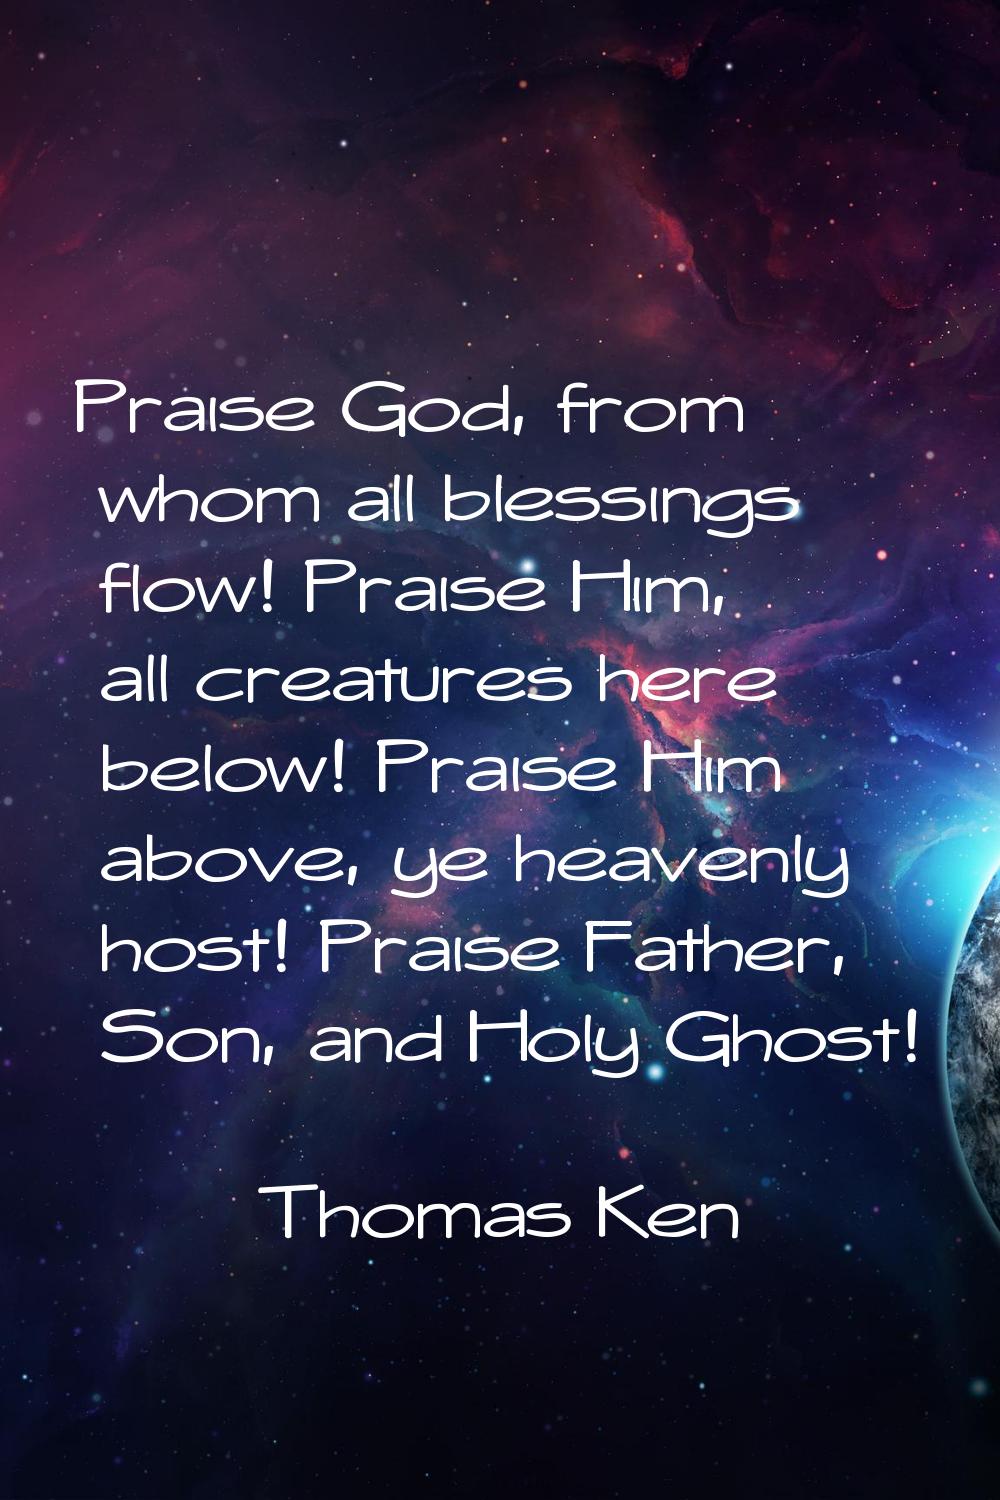 Praise God, from whom all blessings flow! Praise Him, all creatures here below! Praise Him above, y